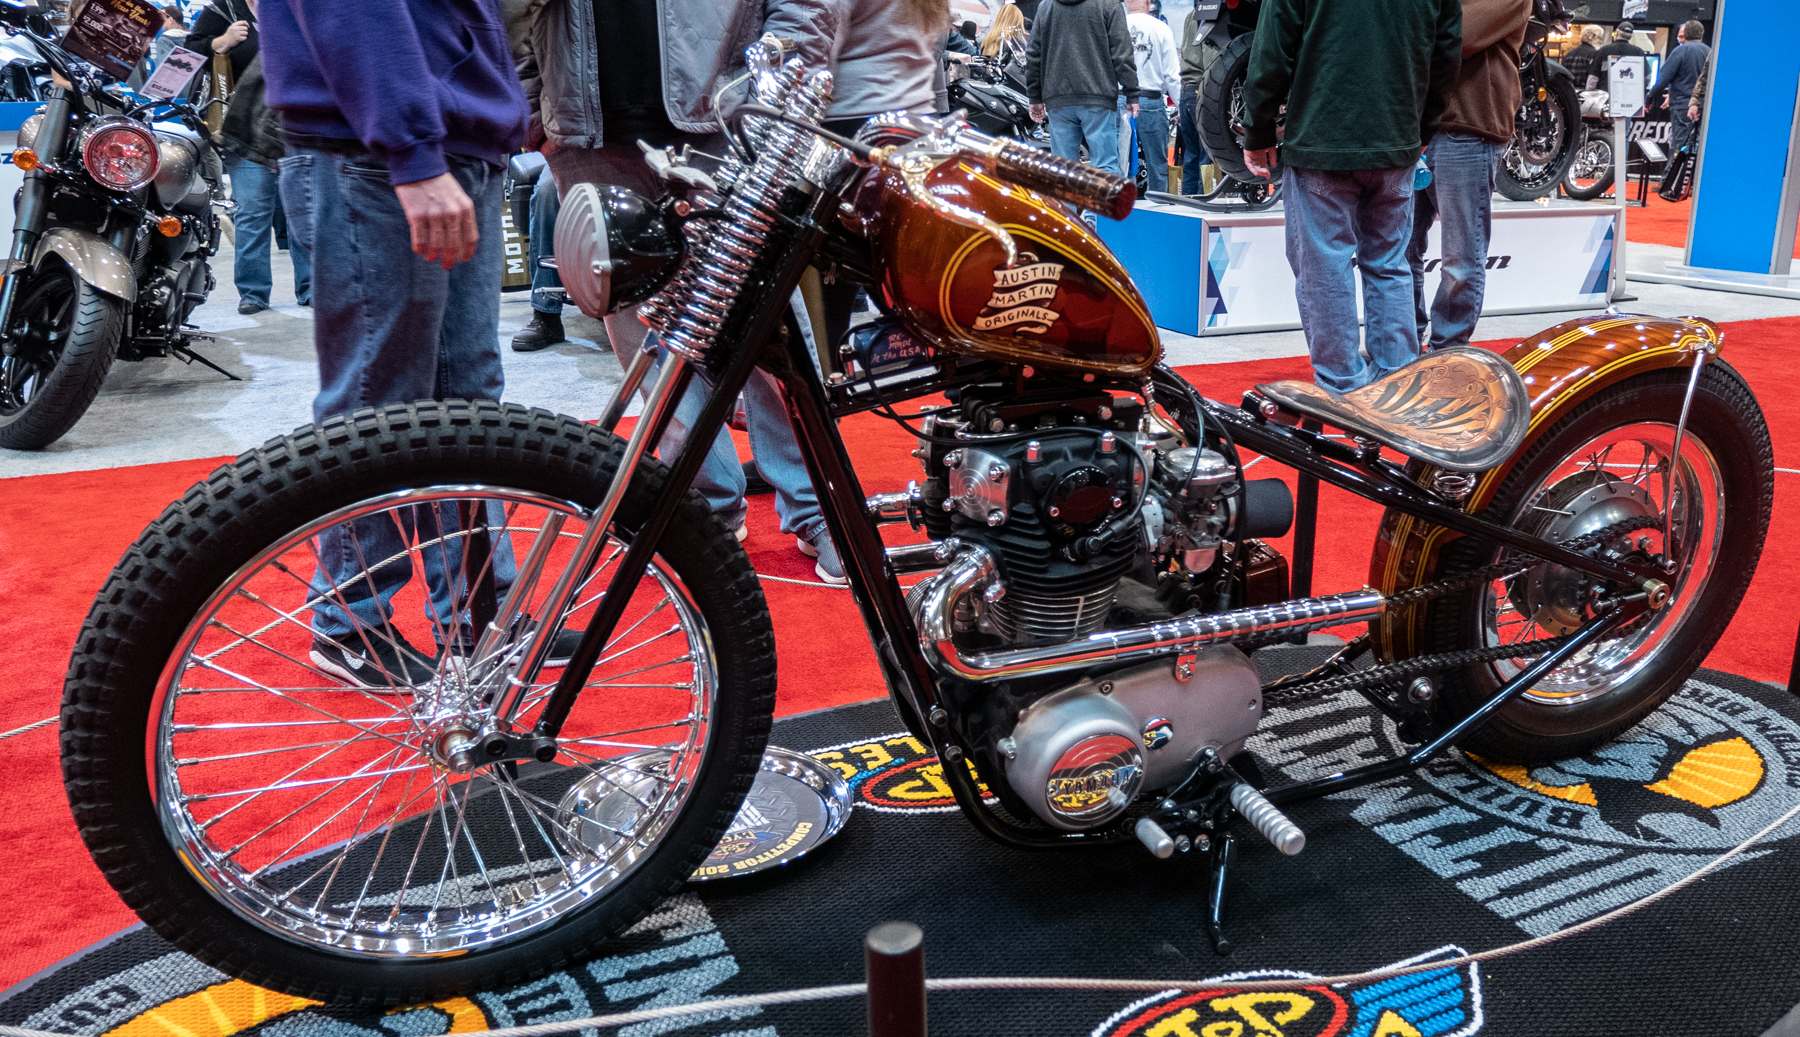 cleveland motorcycle show International Motorcycle Shows 2019 in Cleveland